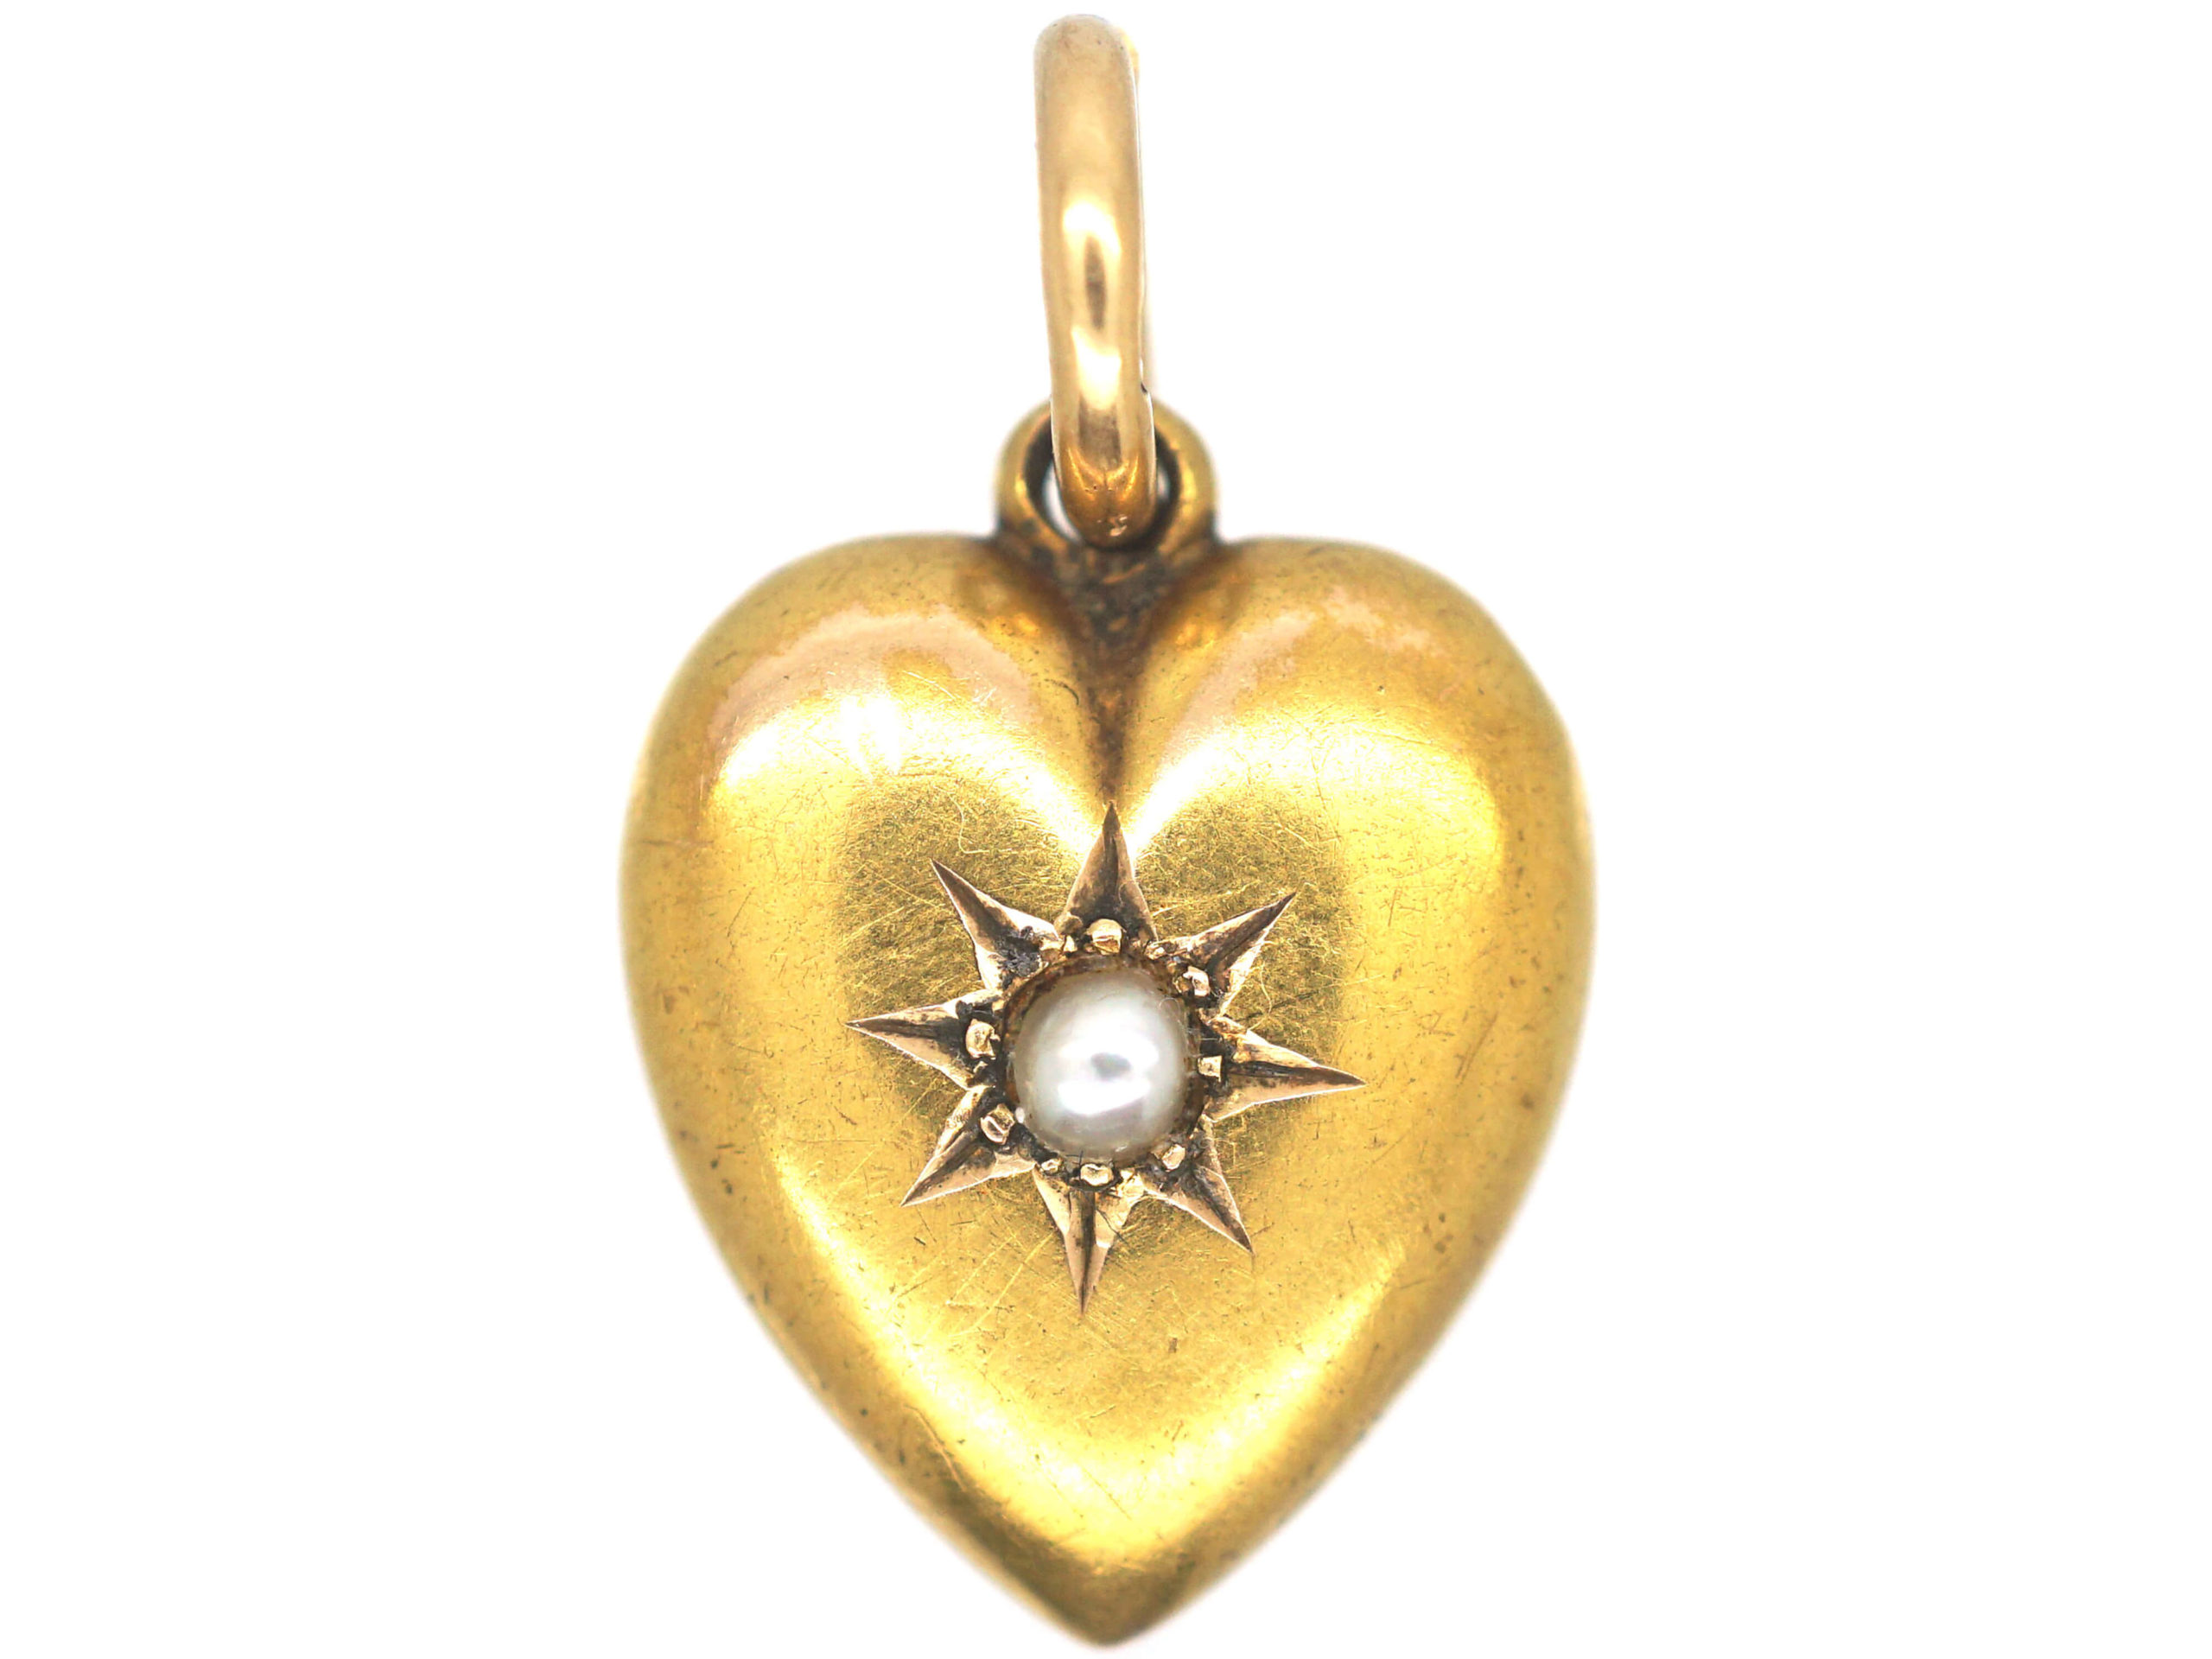 Edwardian 15ct Gold Heart Shaped Pendant set with a Natural Split Pearl ...